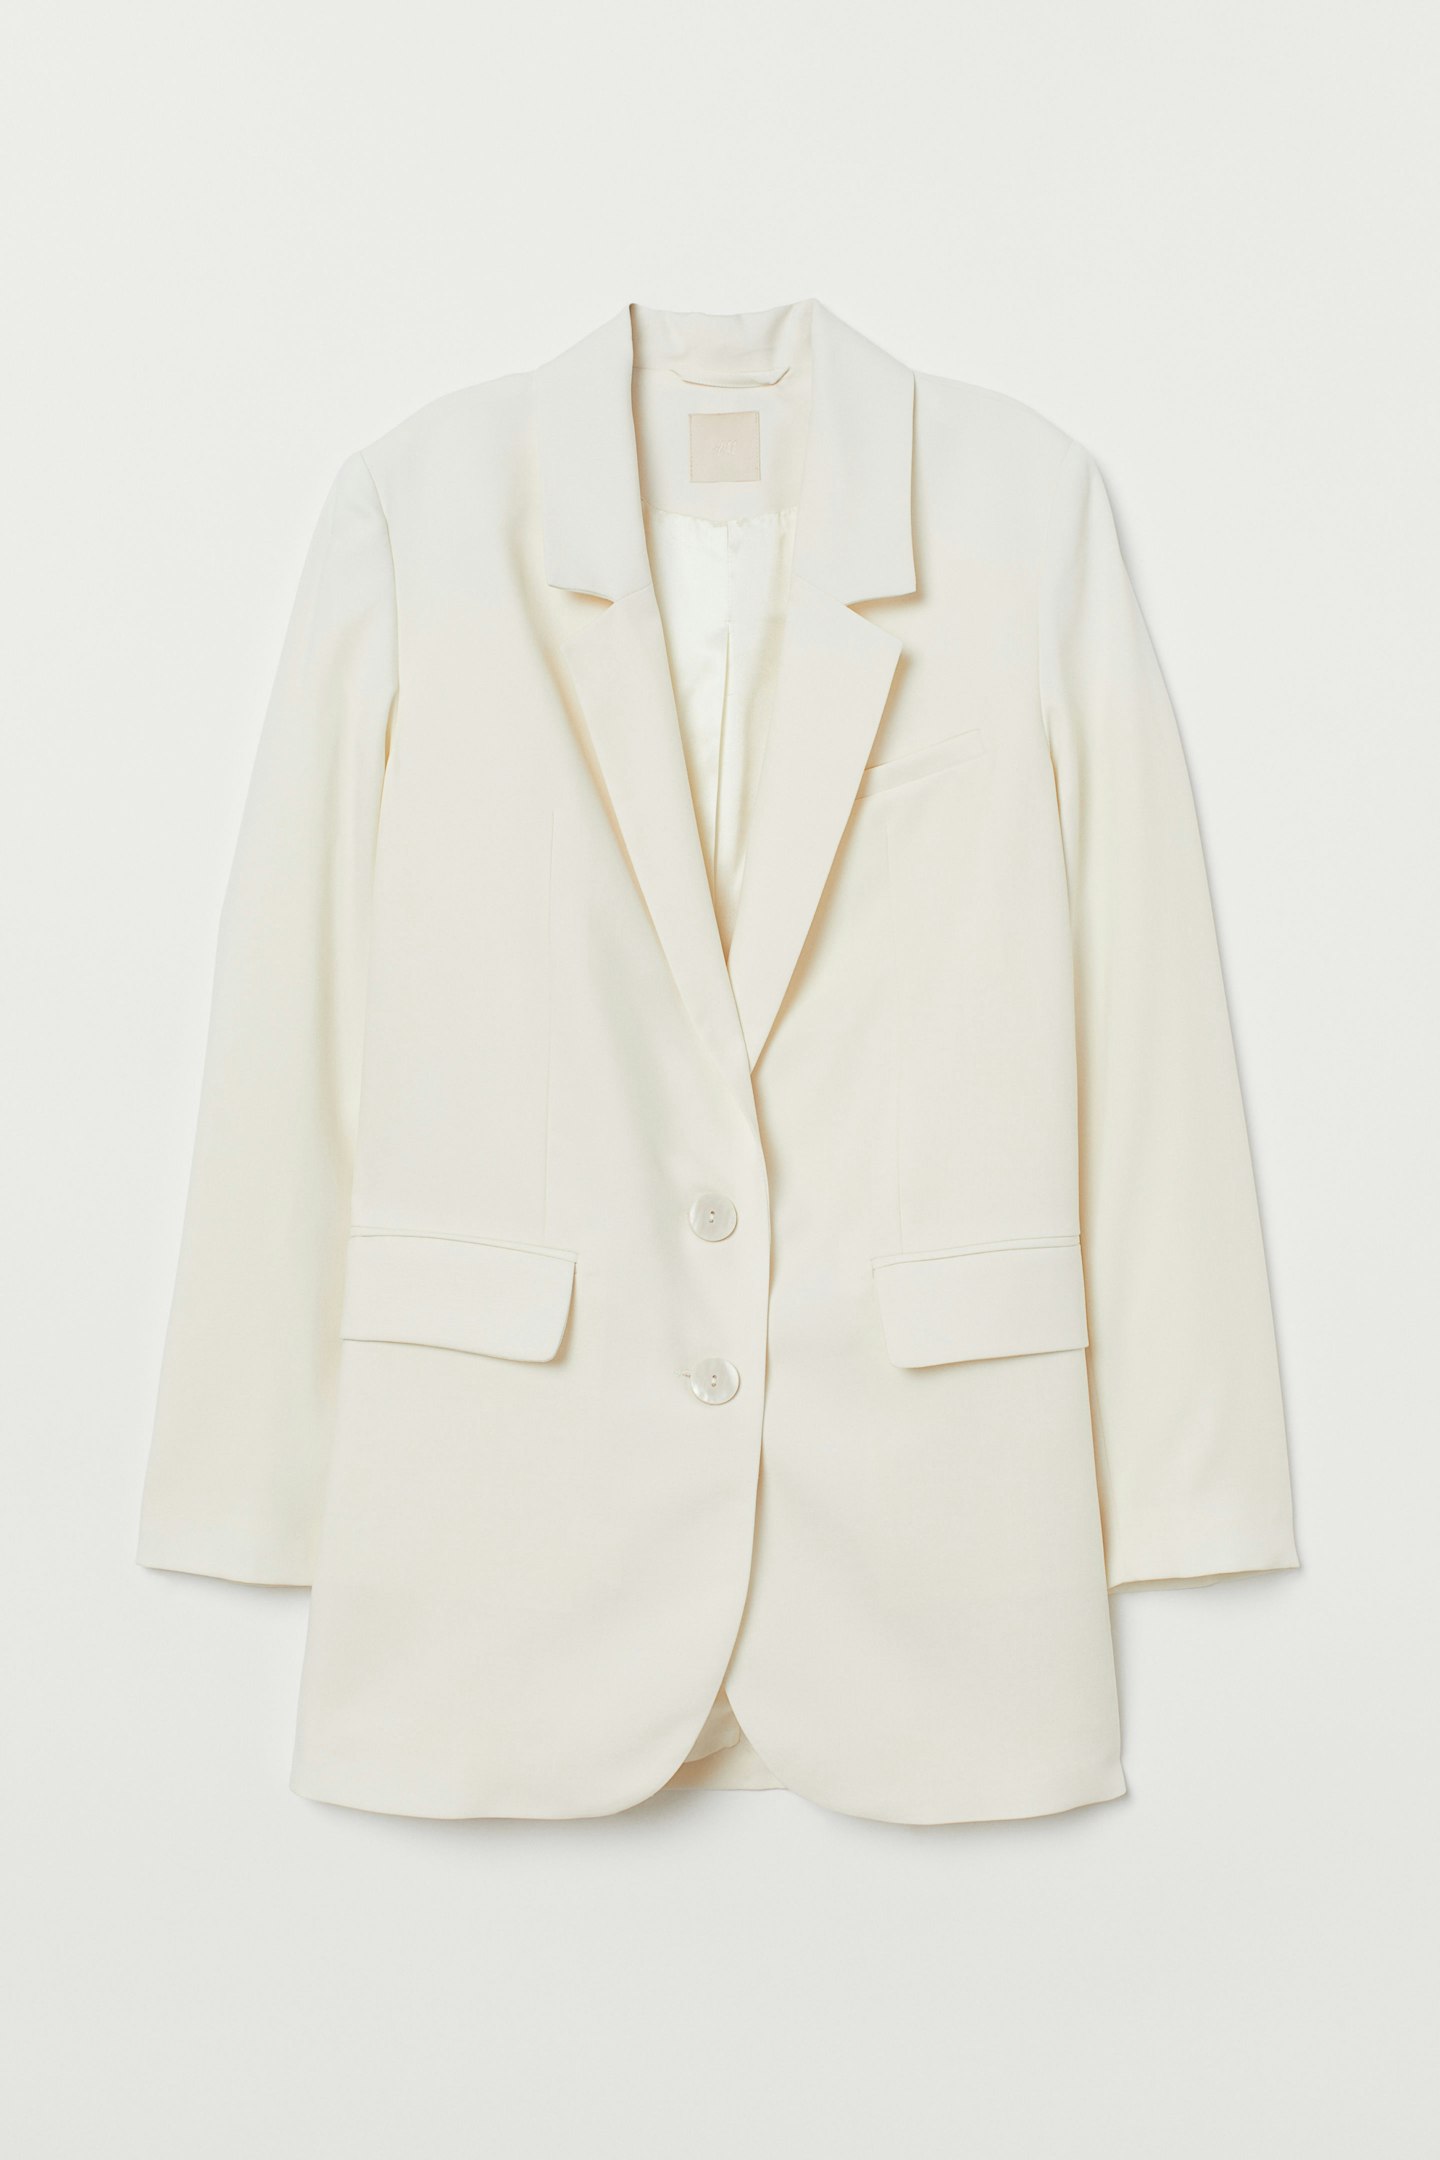 H&M Single breasted jacket